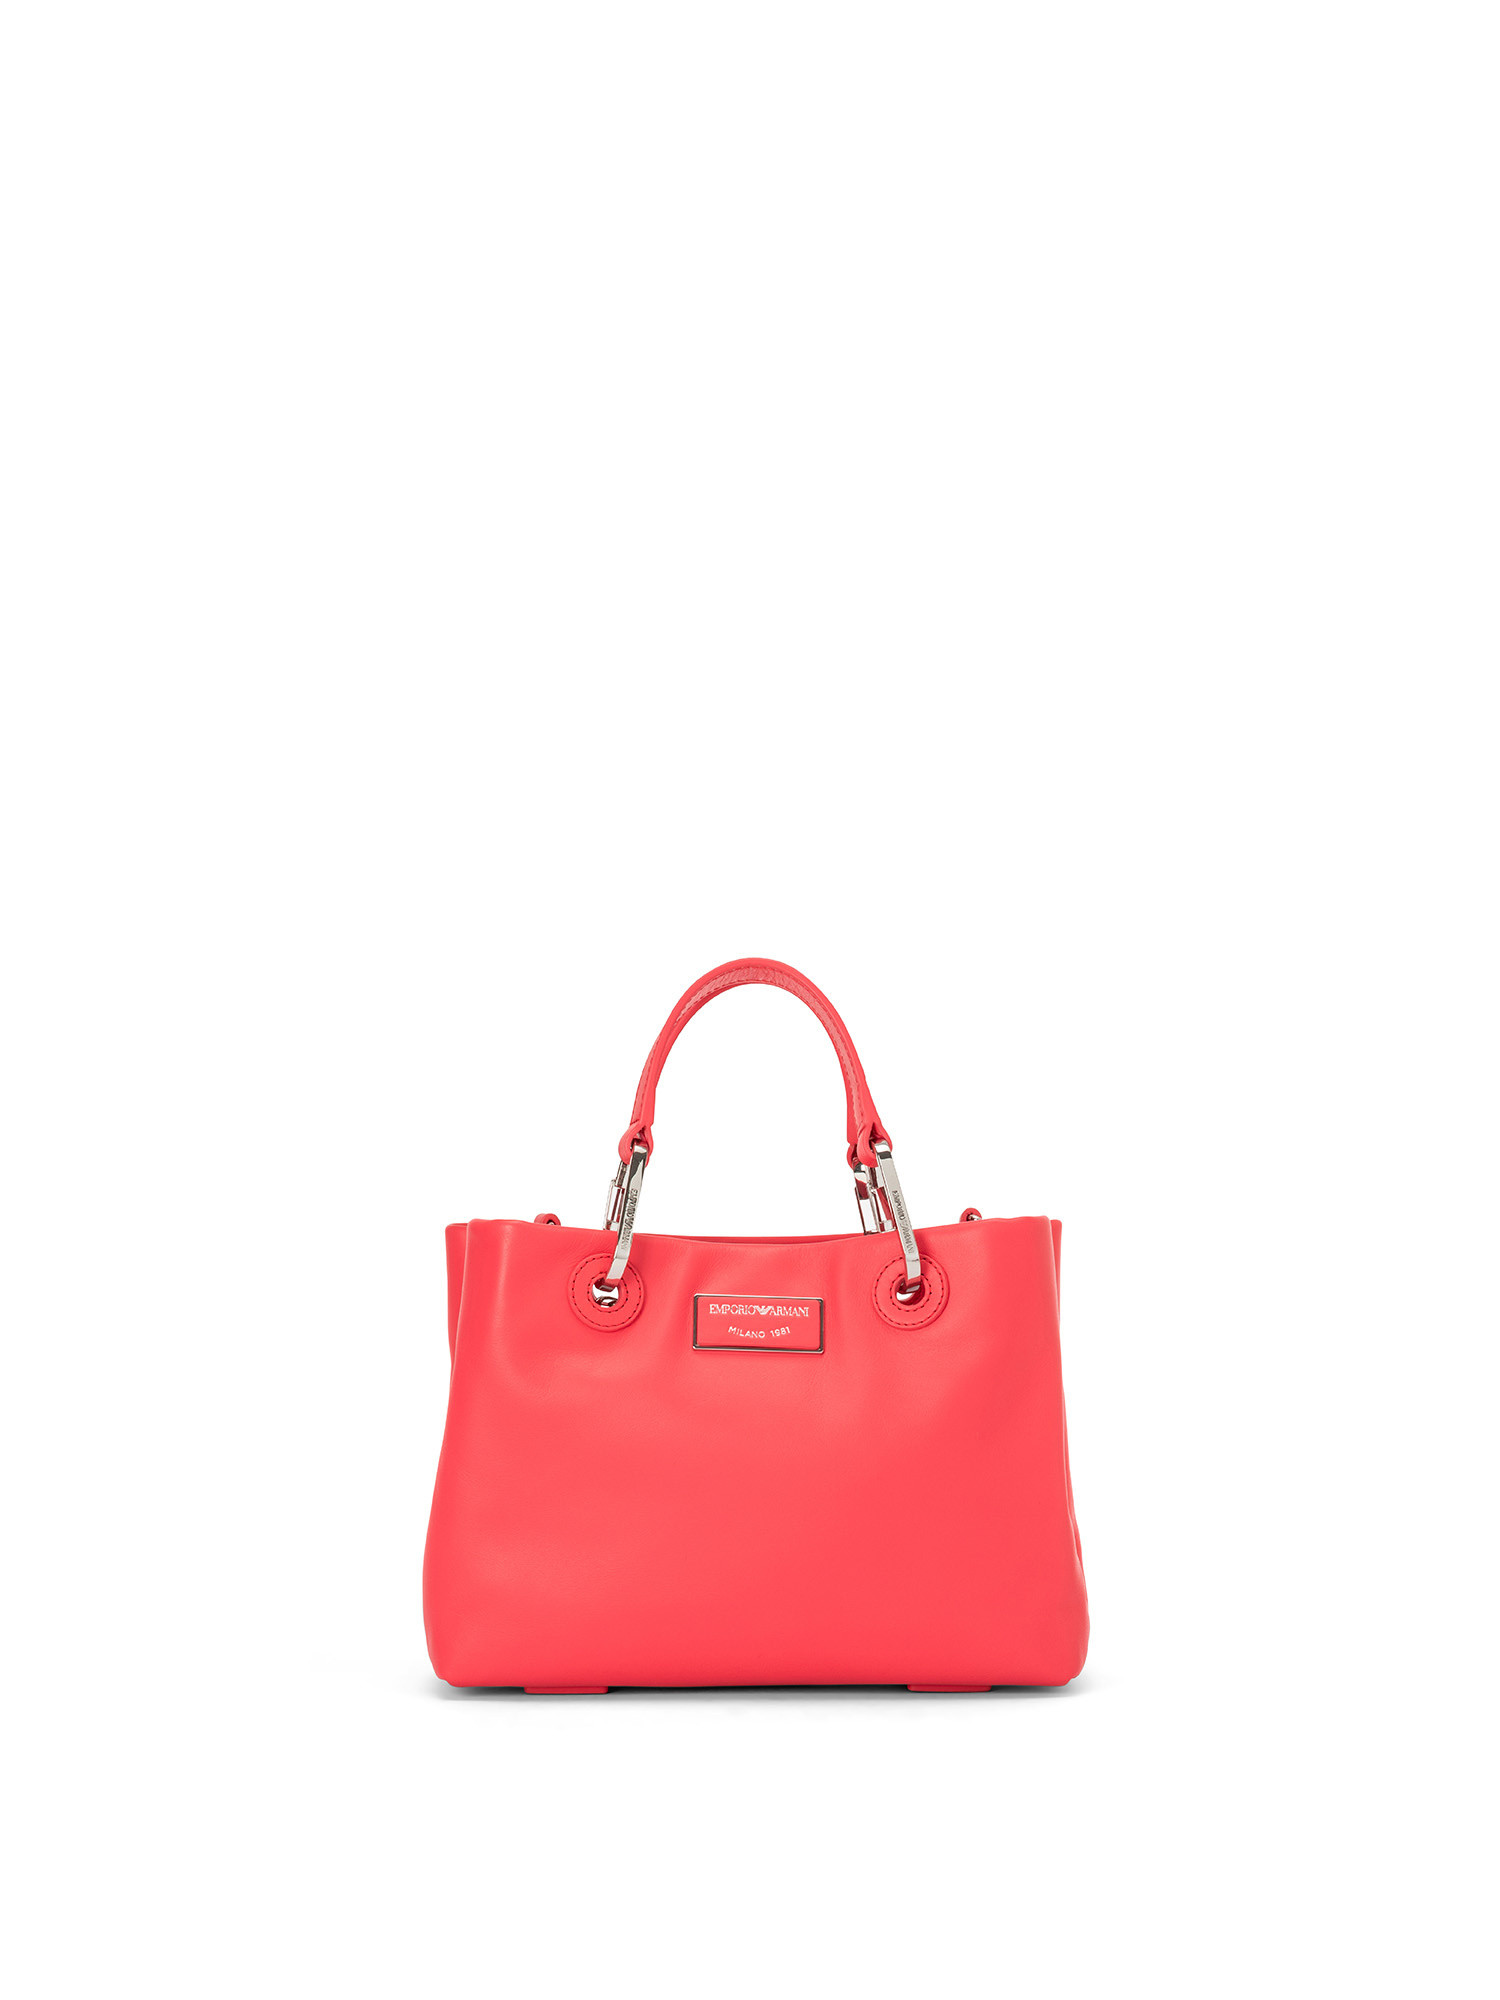 Emporio Armani - Shopper bag in ecological leather, Red, large image number 0